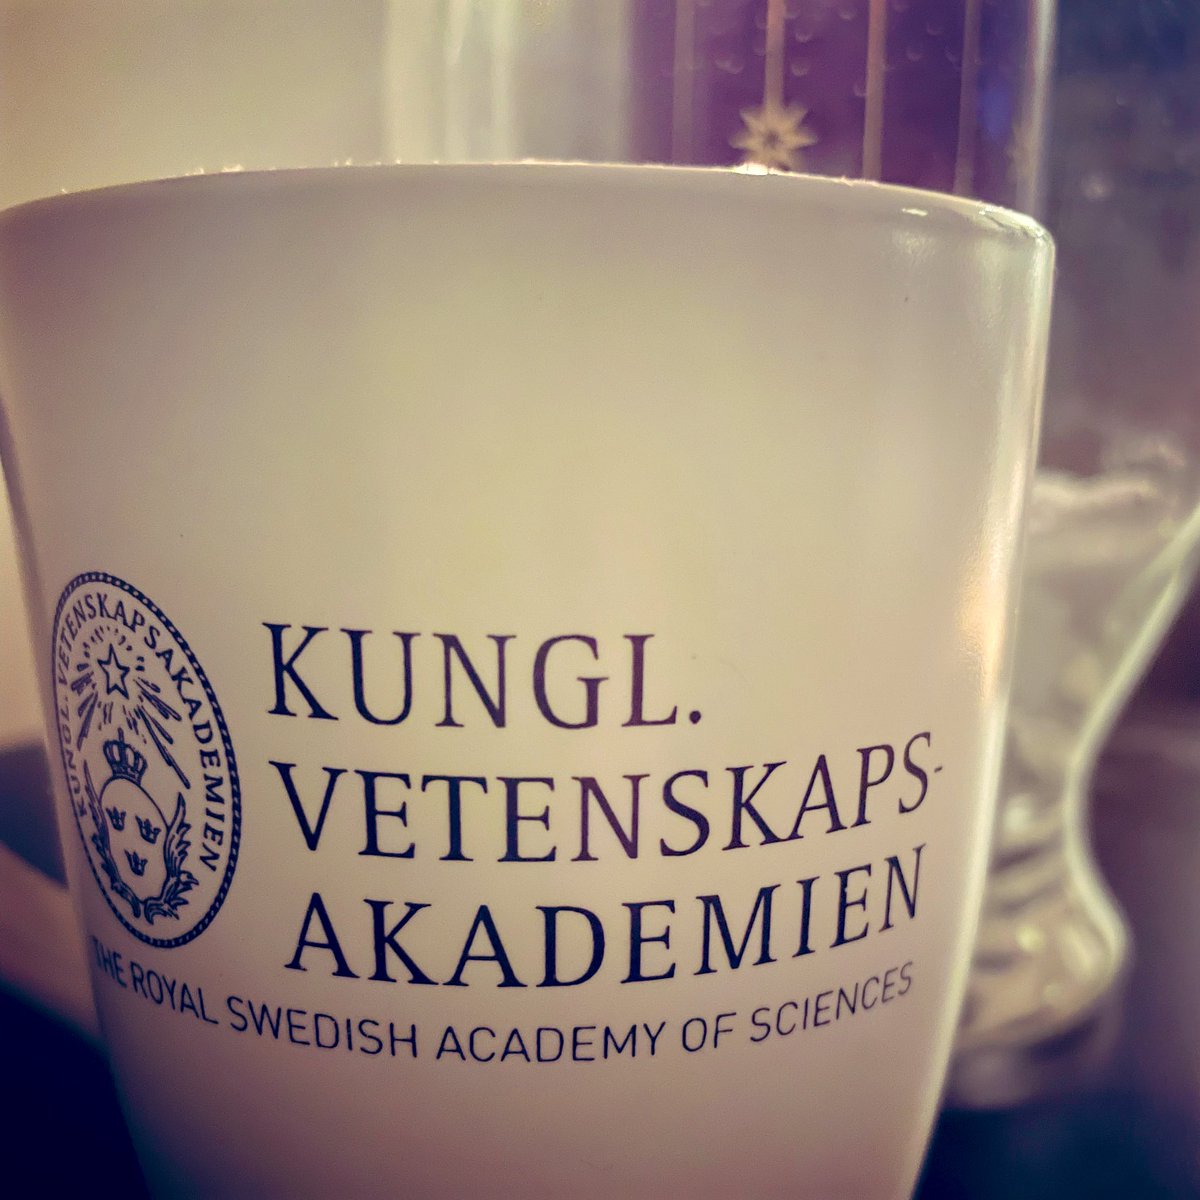 Nice day for this cup of tea #nobelprizeday #nobelday #celebratescience #December10th